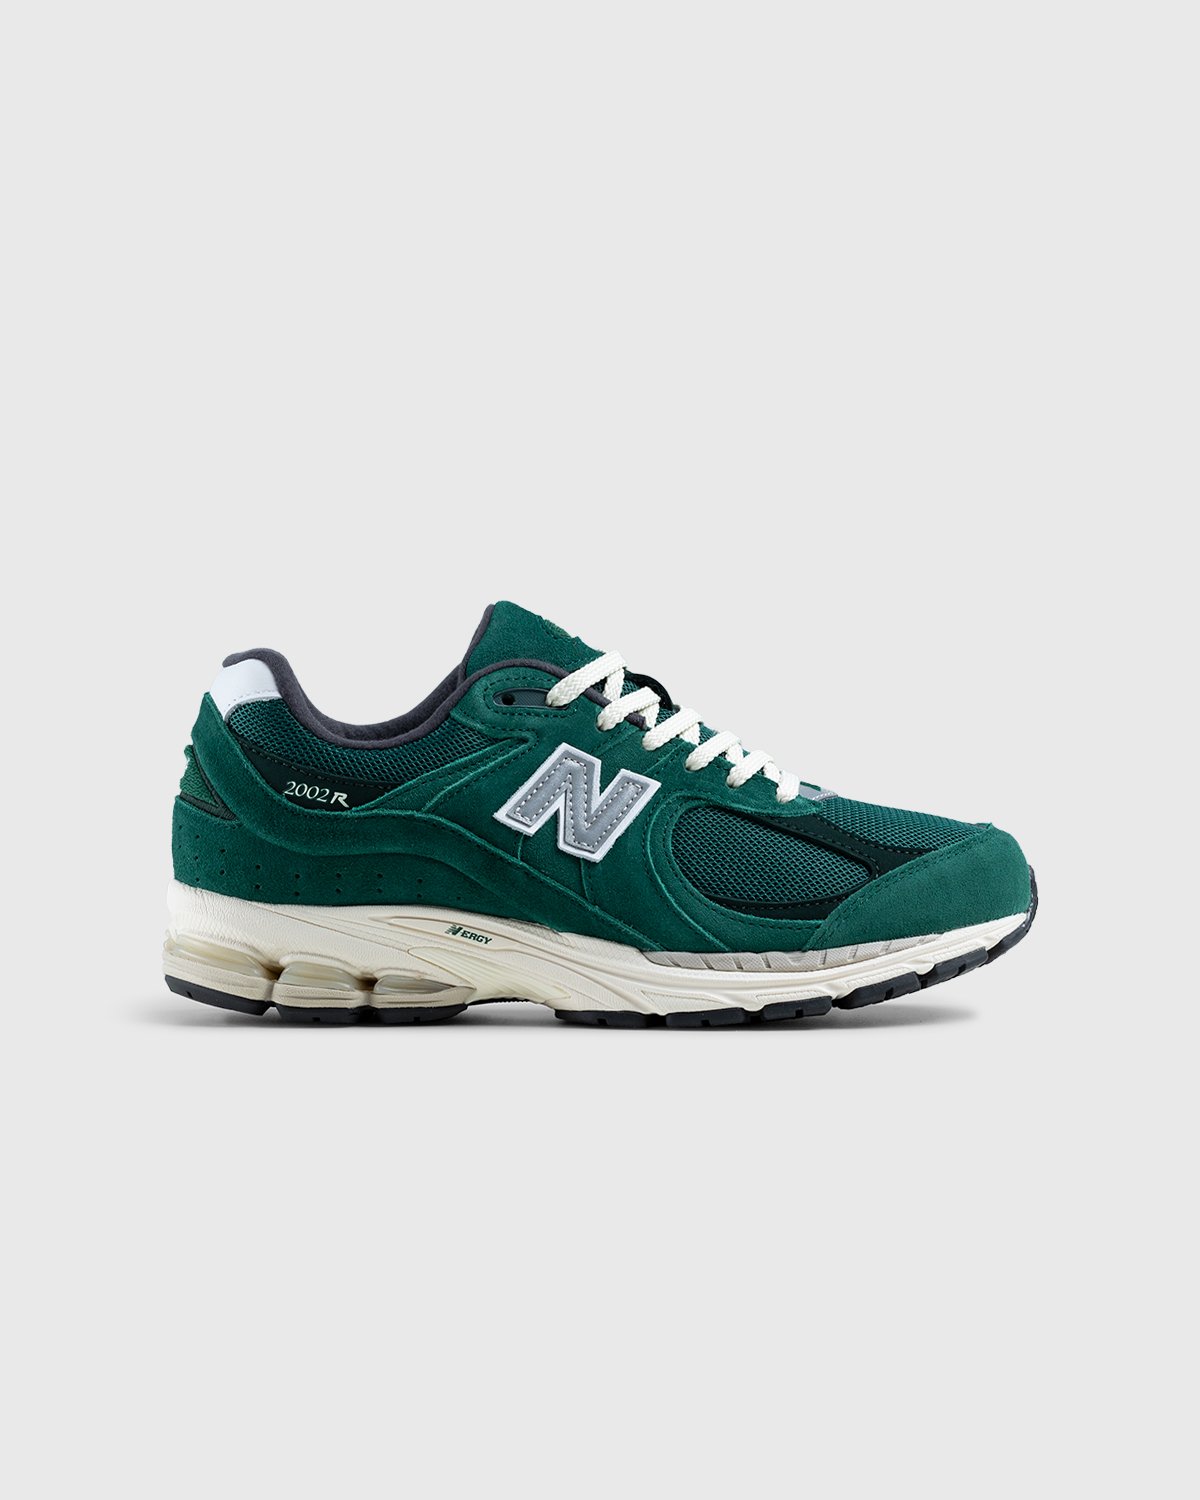 New Balance legends bumbag in off nightwatch green